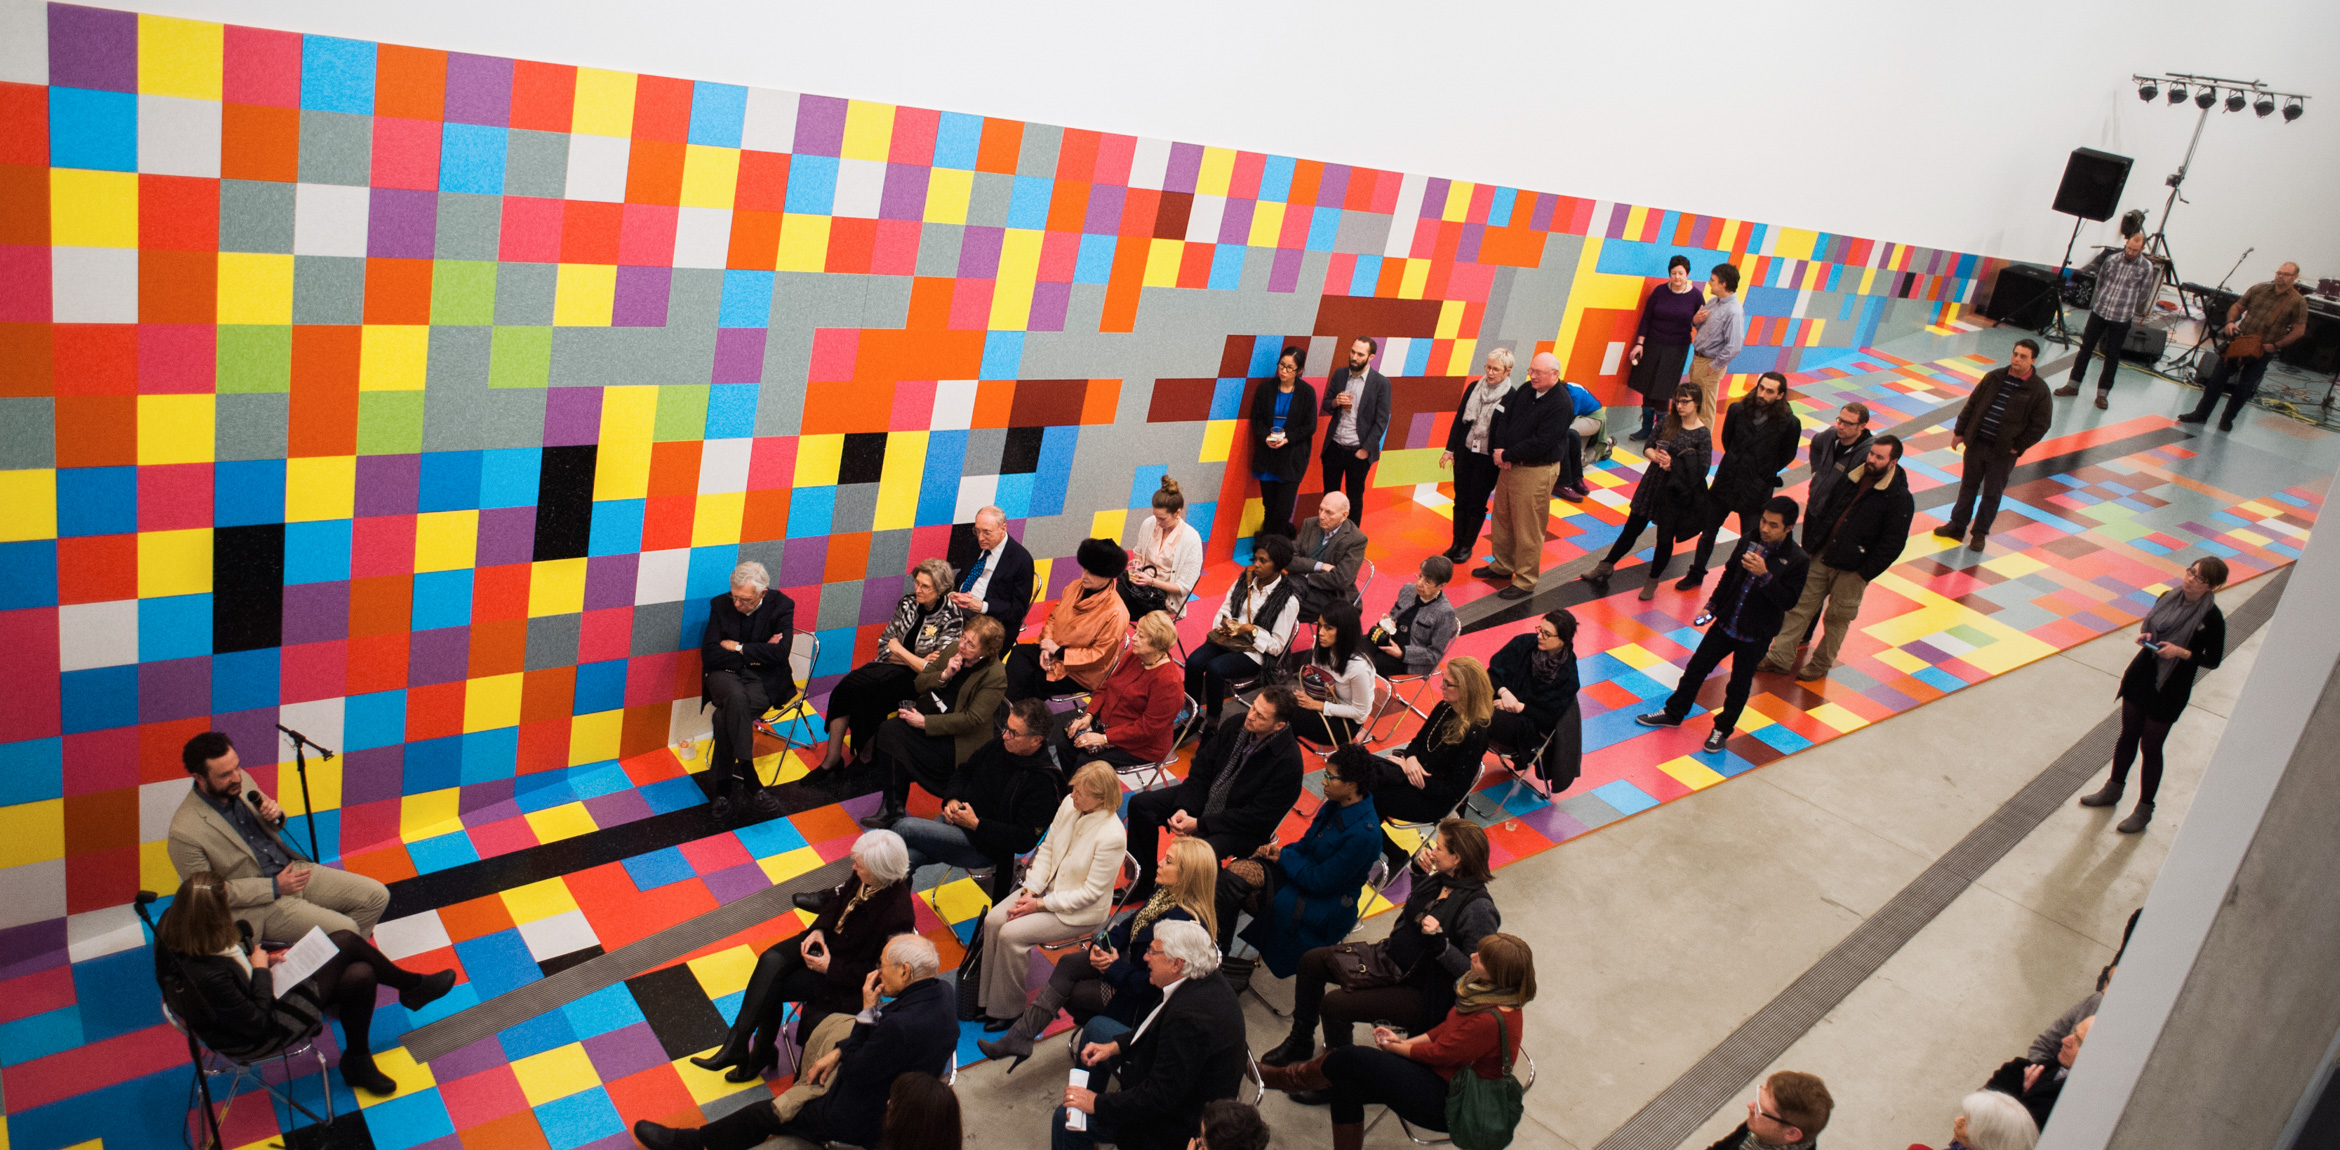 David Scanavino and an interviewer sit and speak into microphones for a seated audience in the main gallery, on Scanavino's colorful gridded installation.